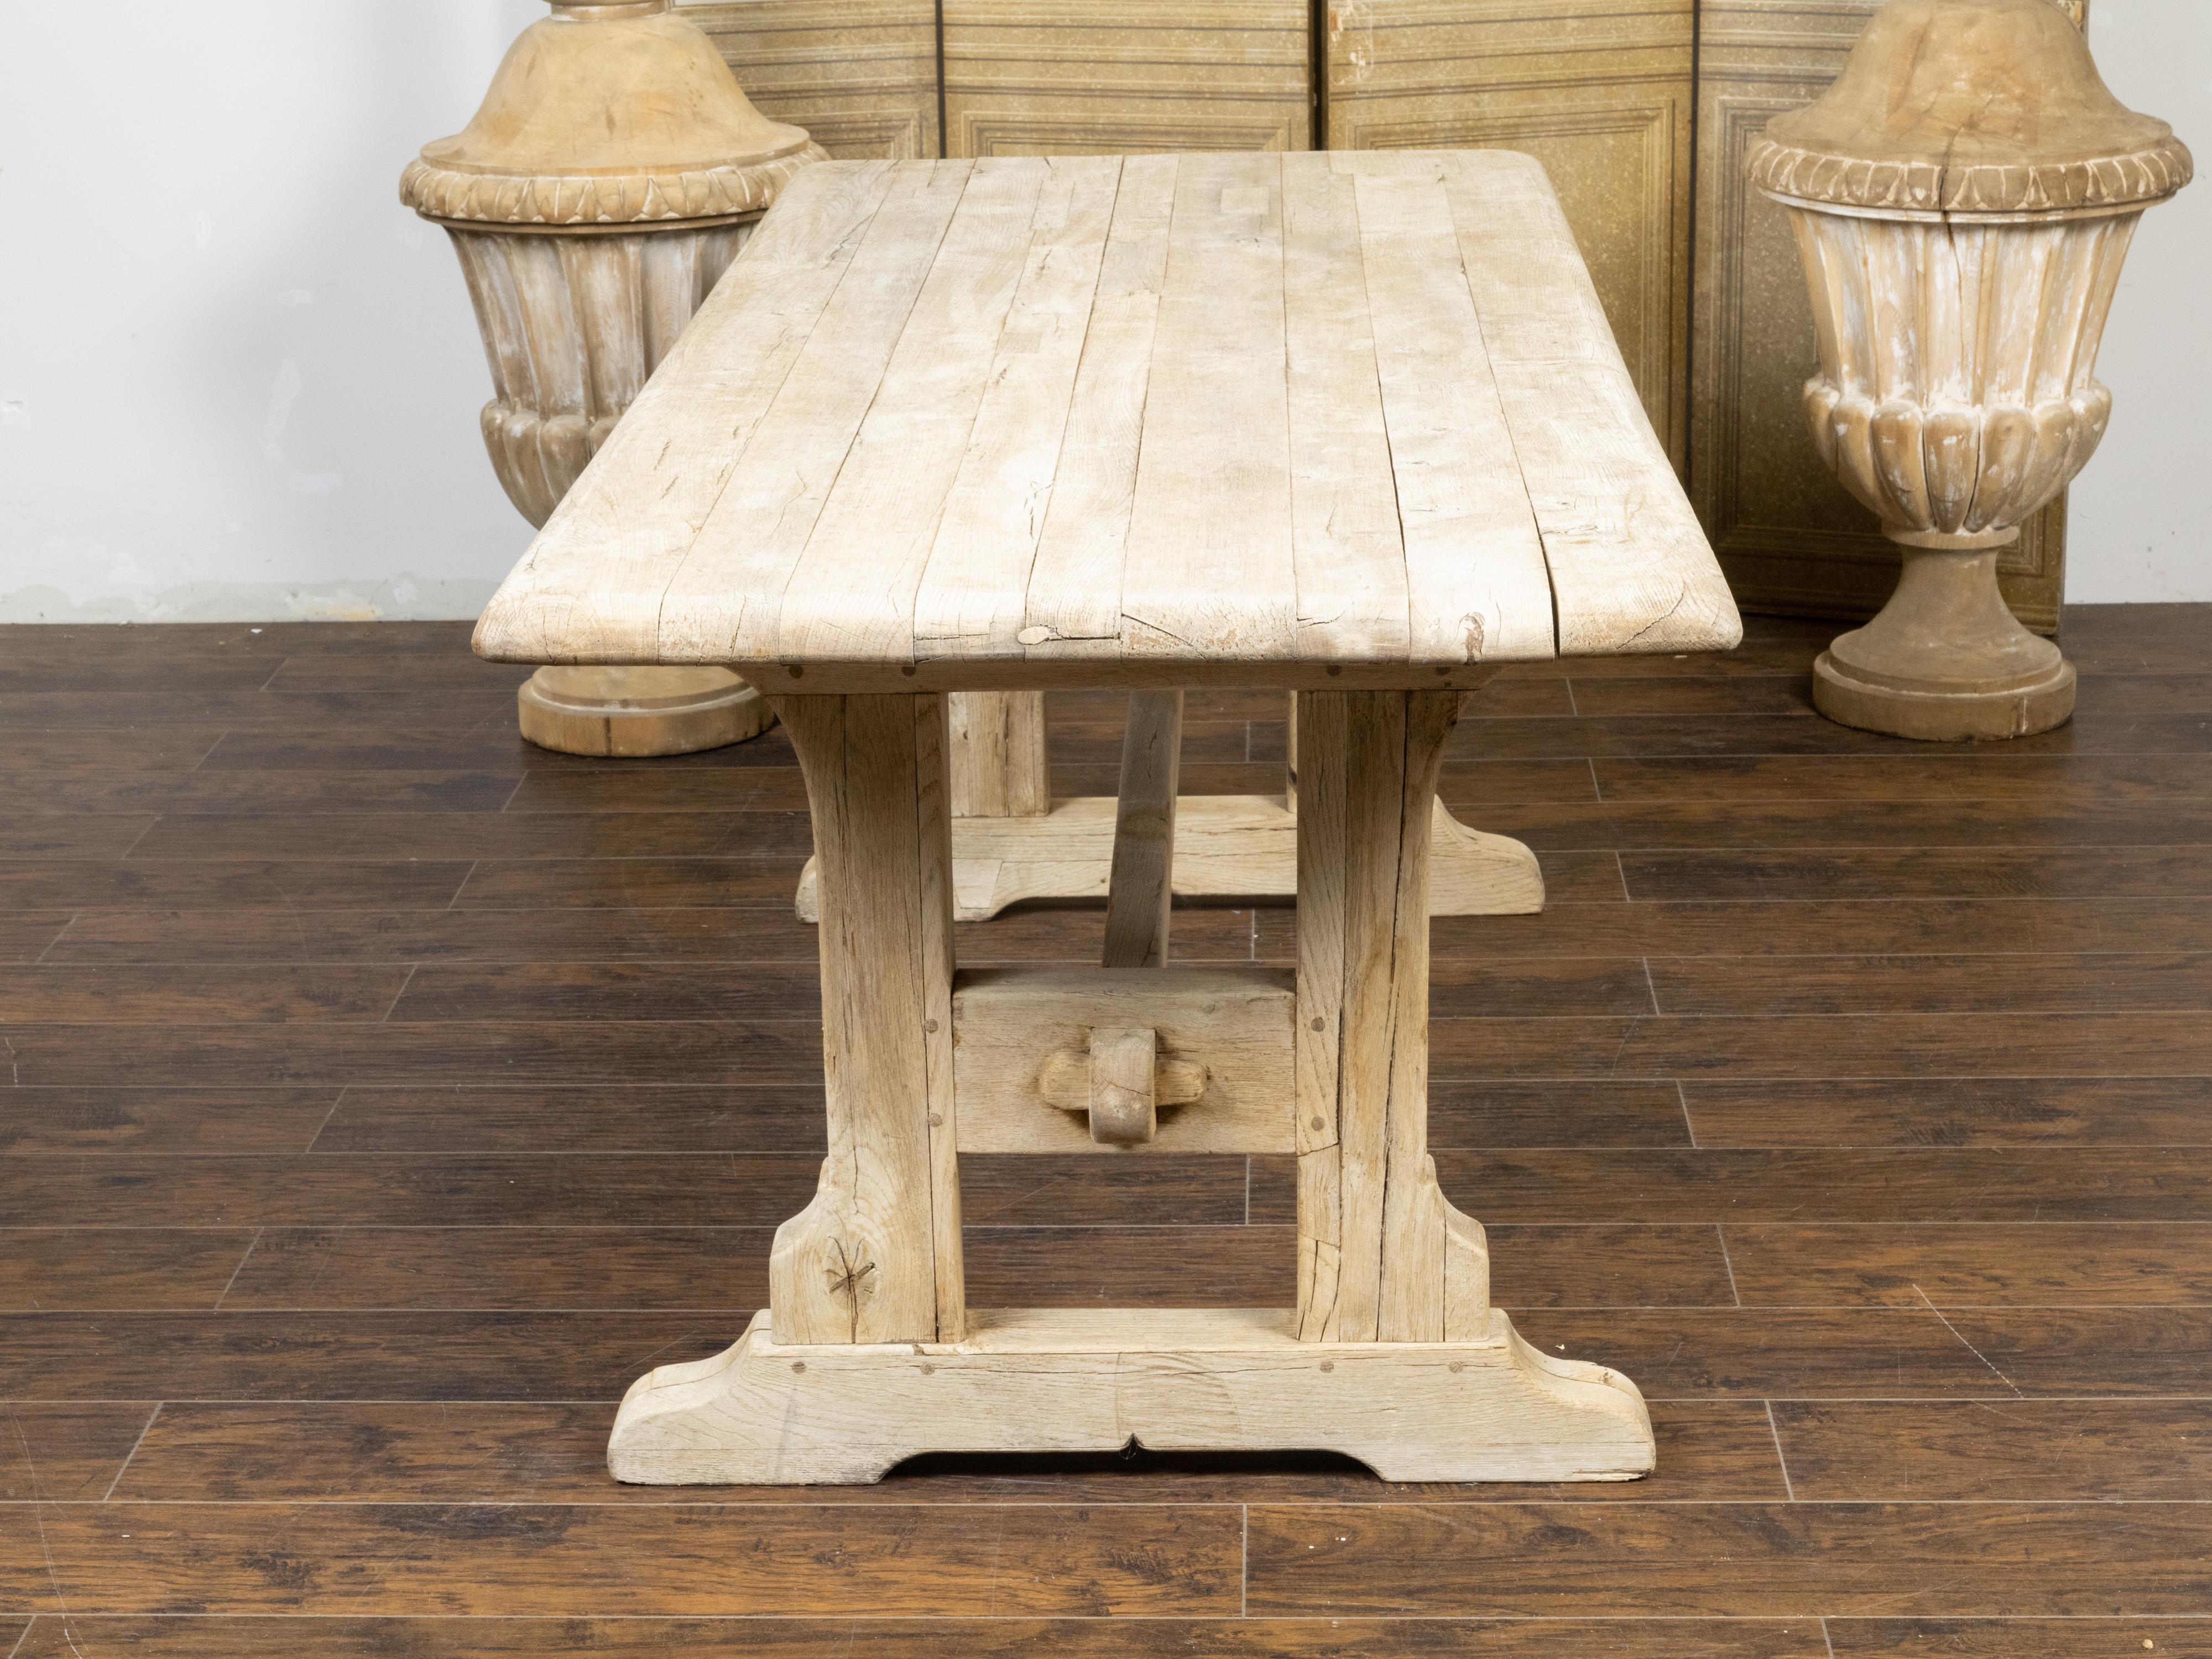 Rustic English 19th Century Natural Wood Farm Table with Trestle Base For Sale 4